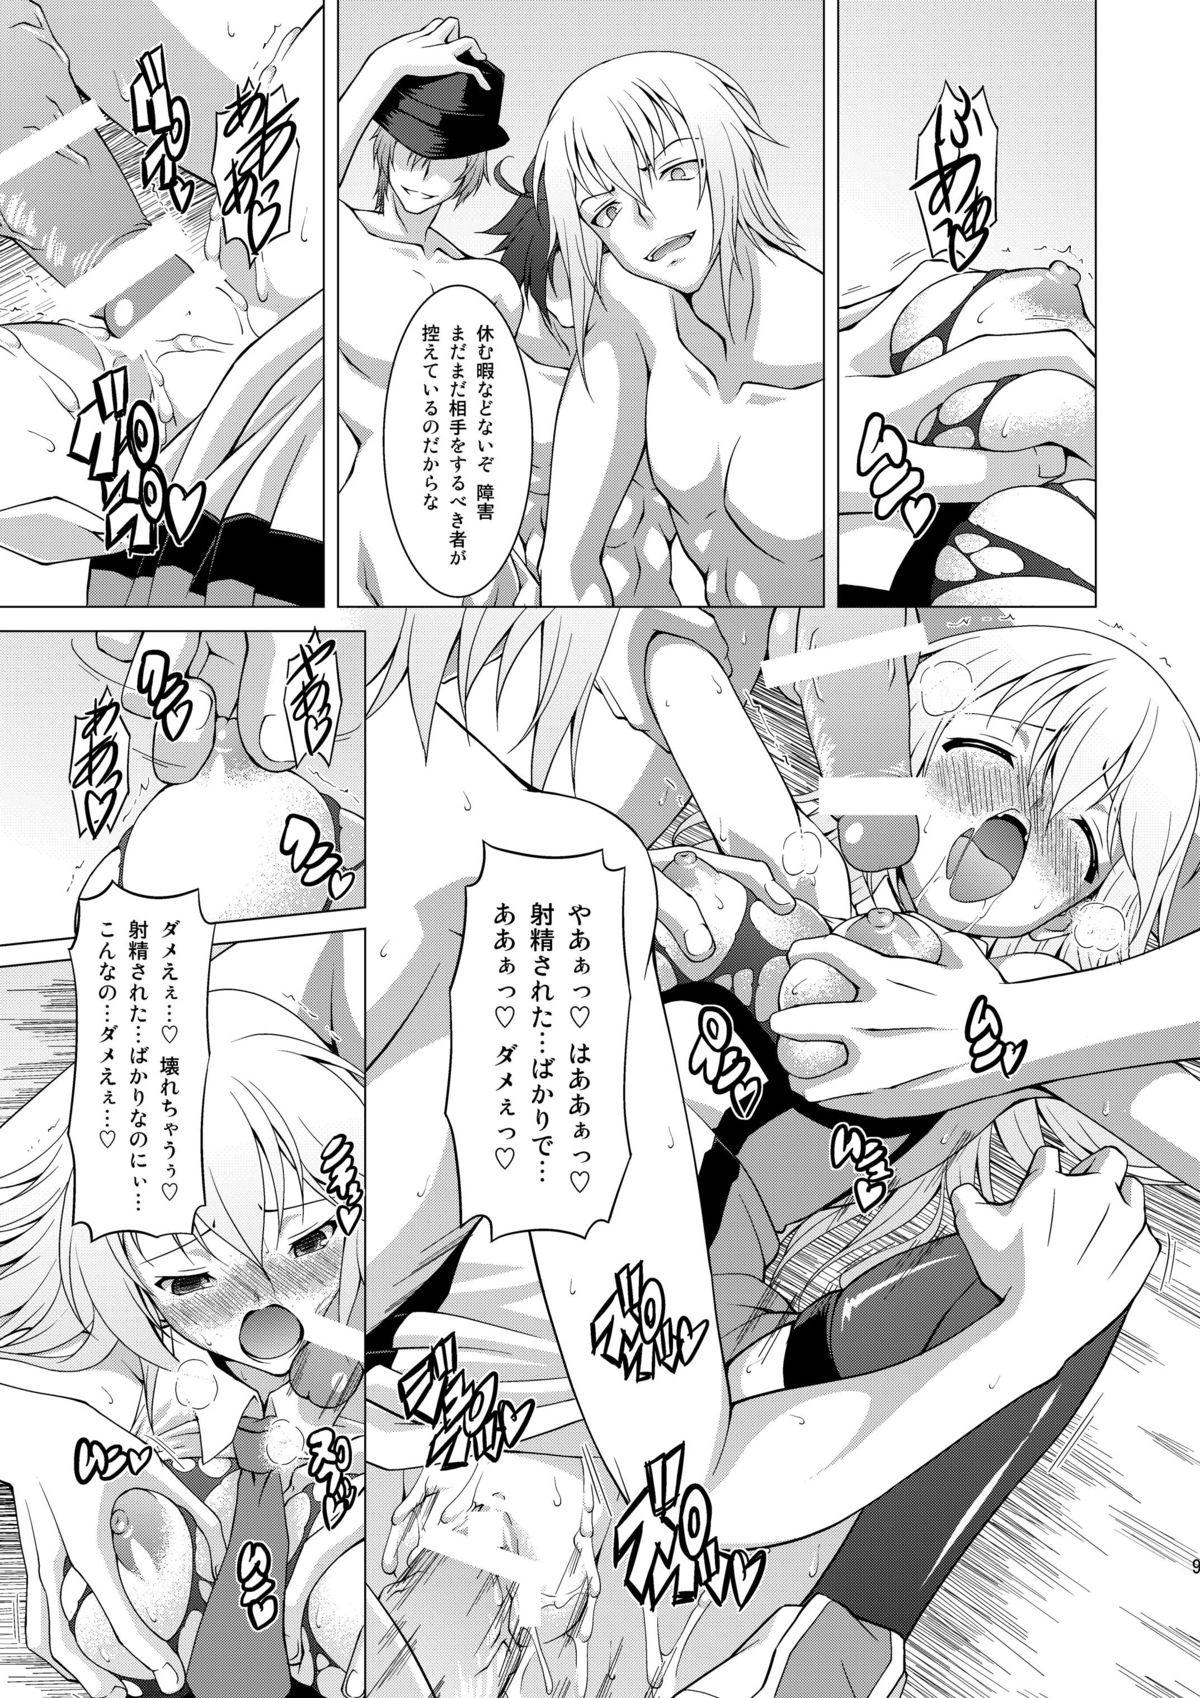 Family Taboo Ran ☆ Bato - Round 2 - King of fighters Samurai spirits Queens blade Guilty gear Blazblue Huge Cock - Page 9